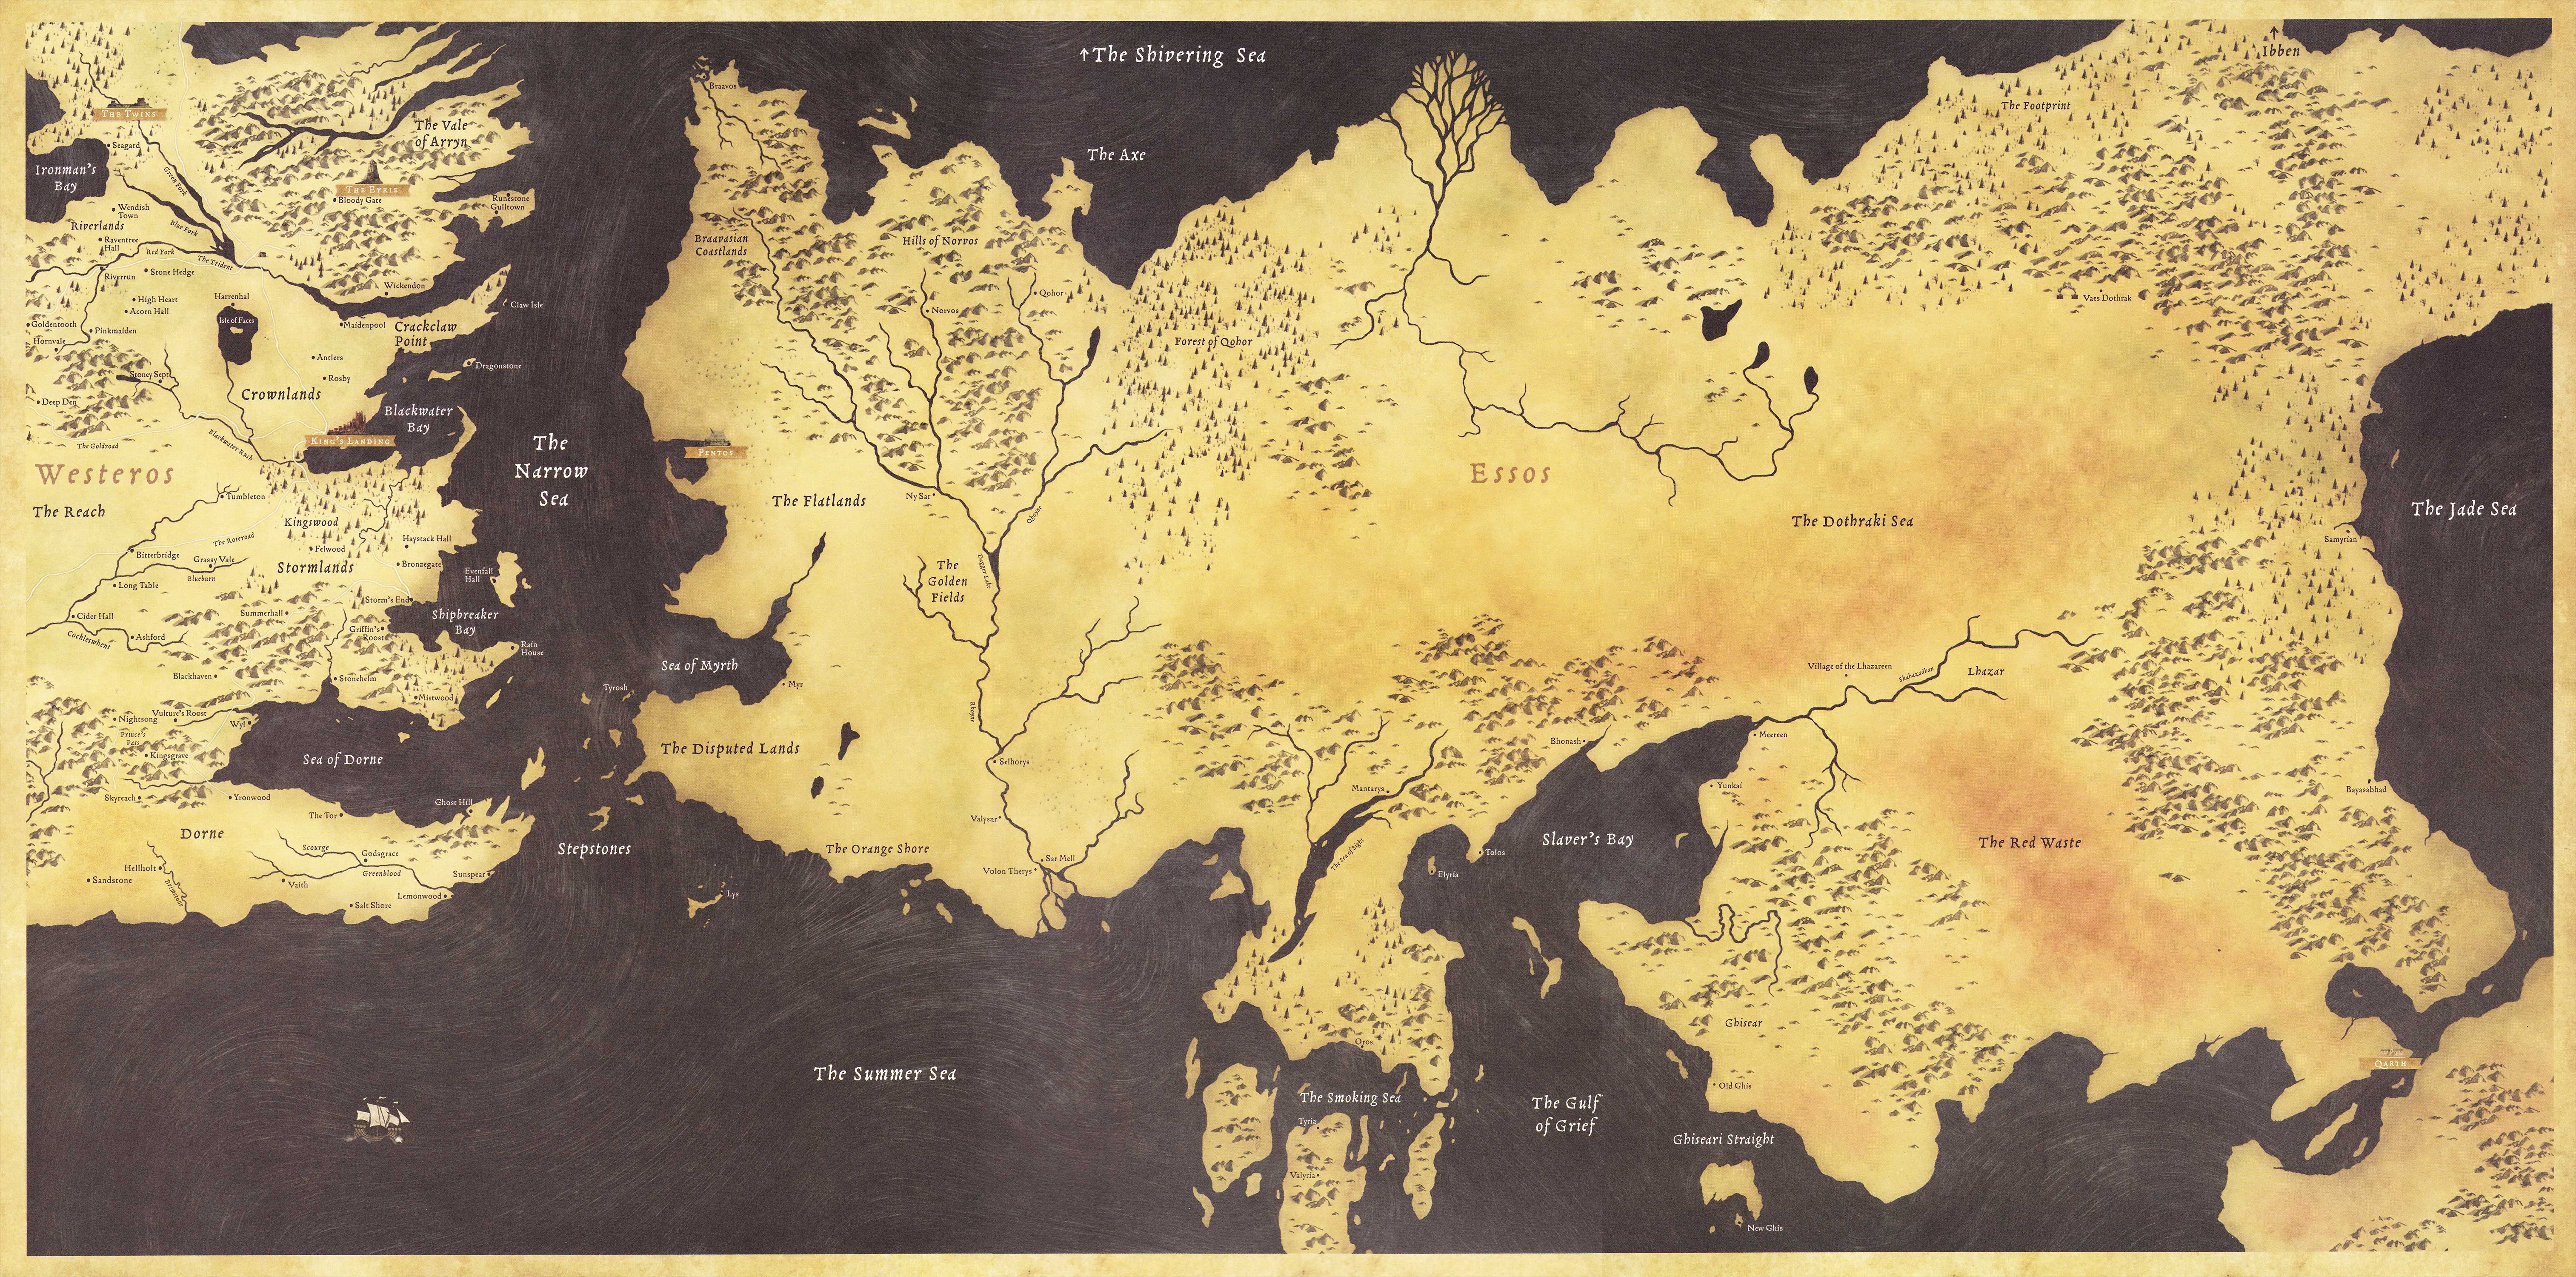 1080P Game Of Thrones Map Wallpaper Gif